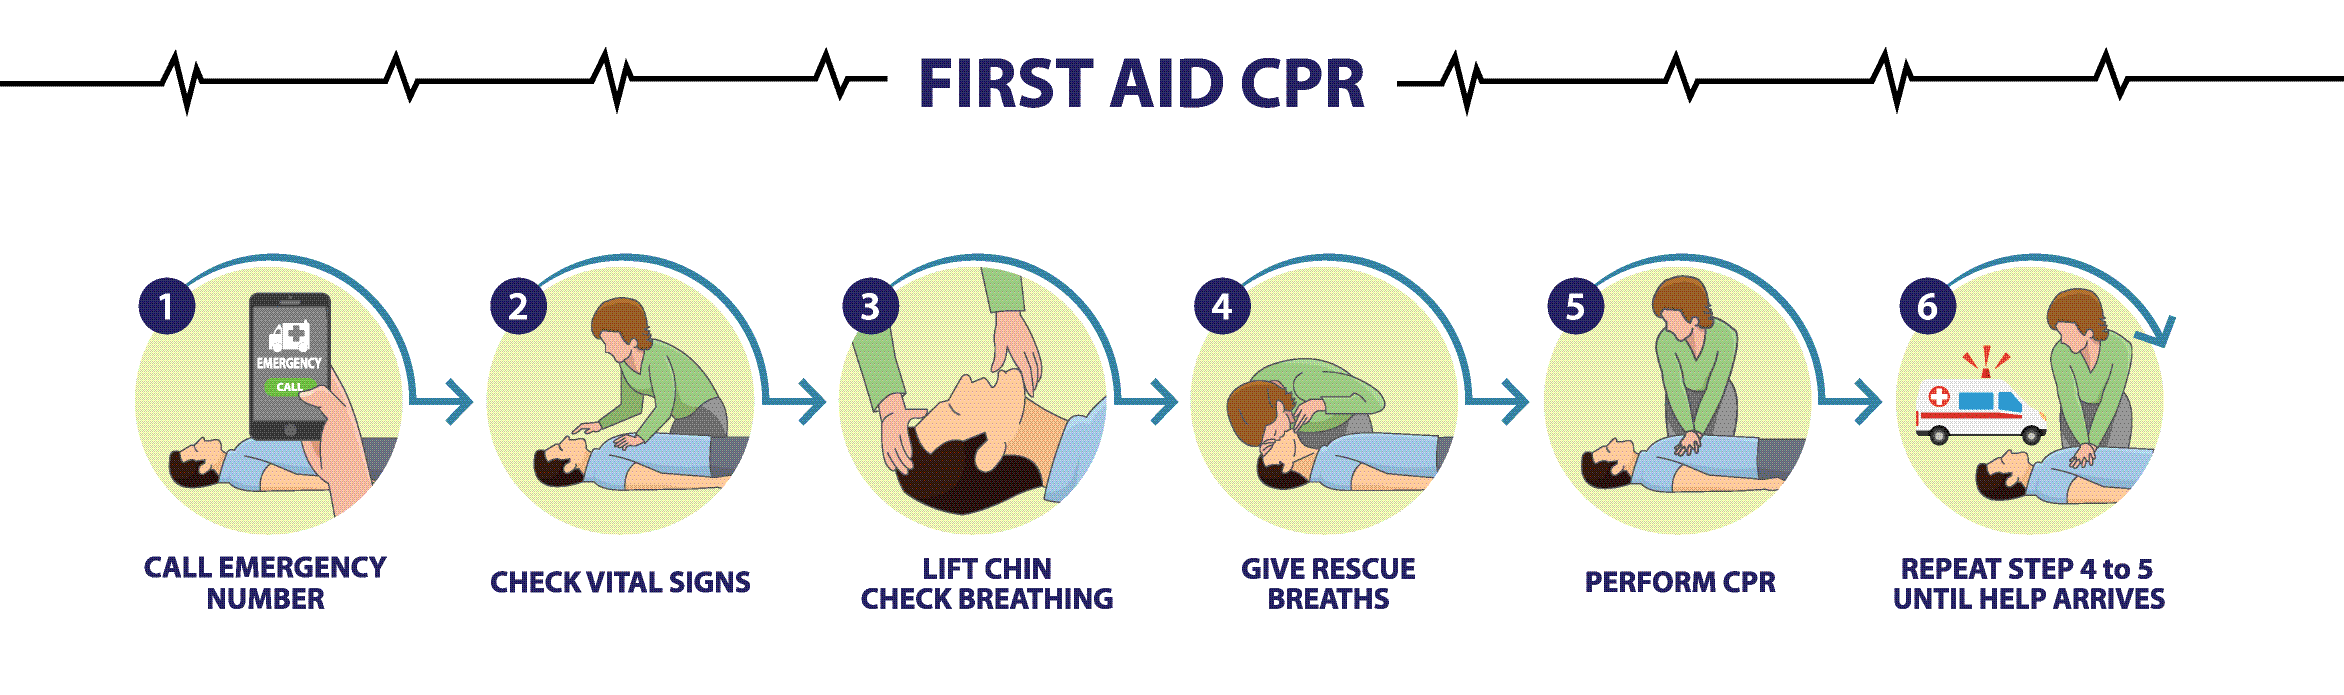 10 Steps Of CPR